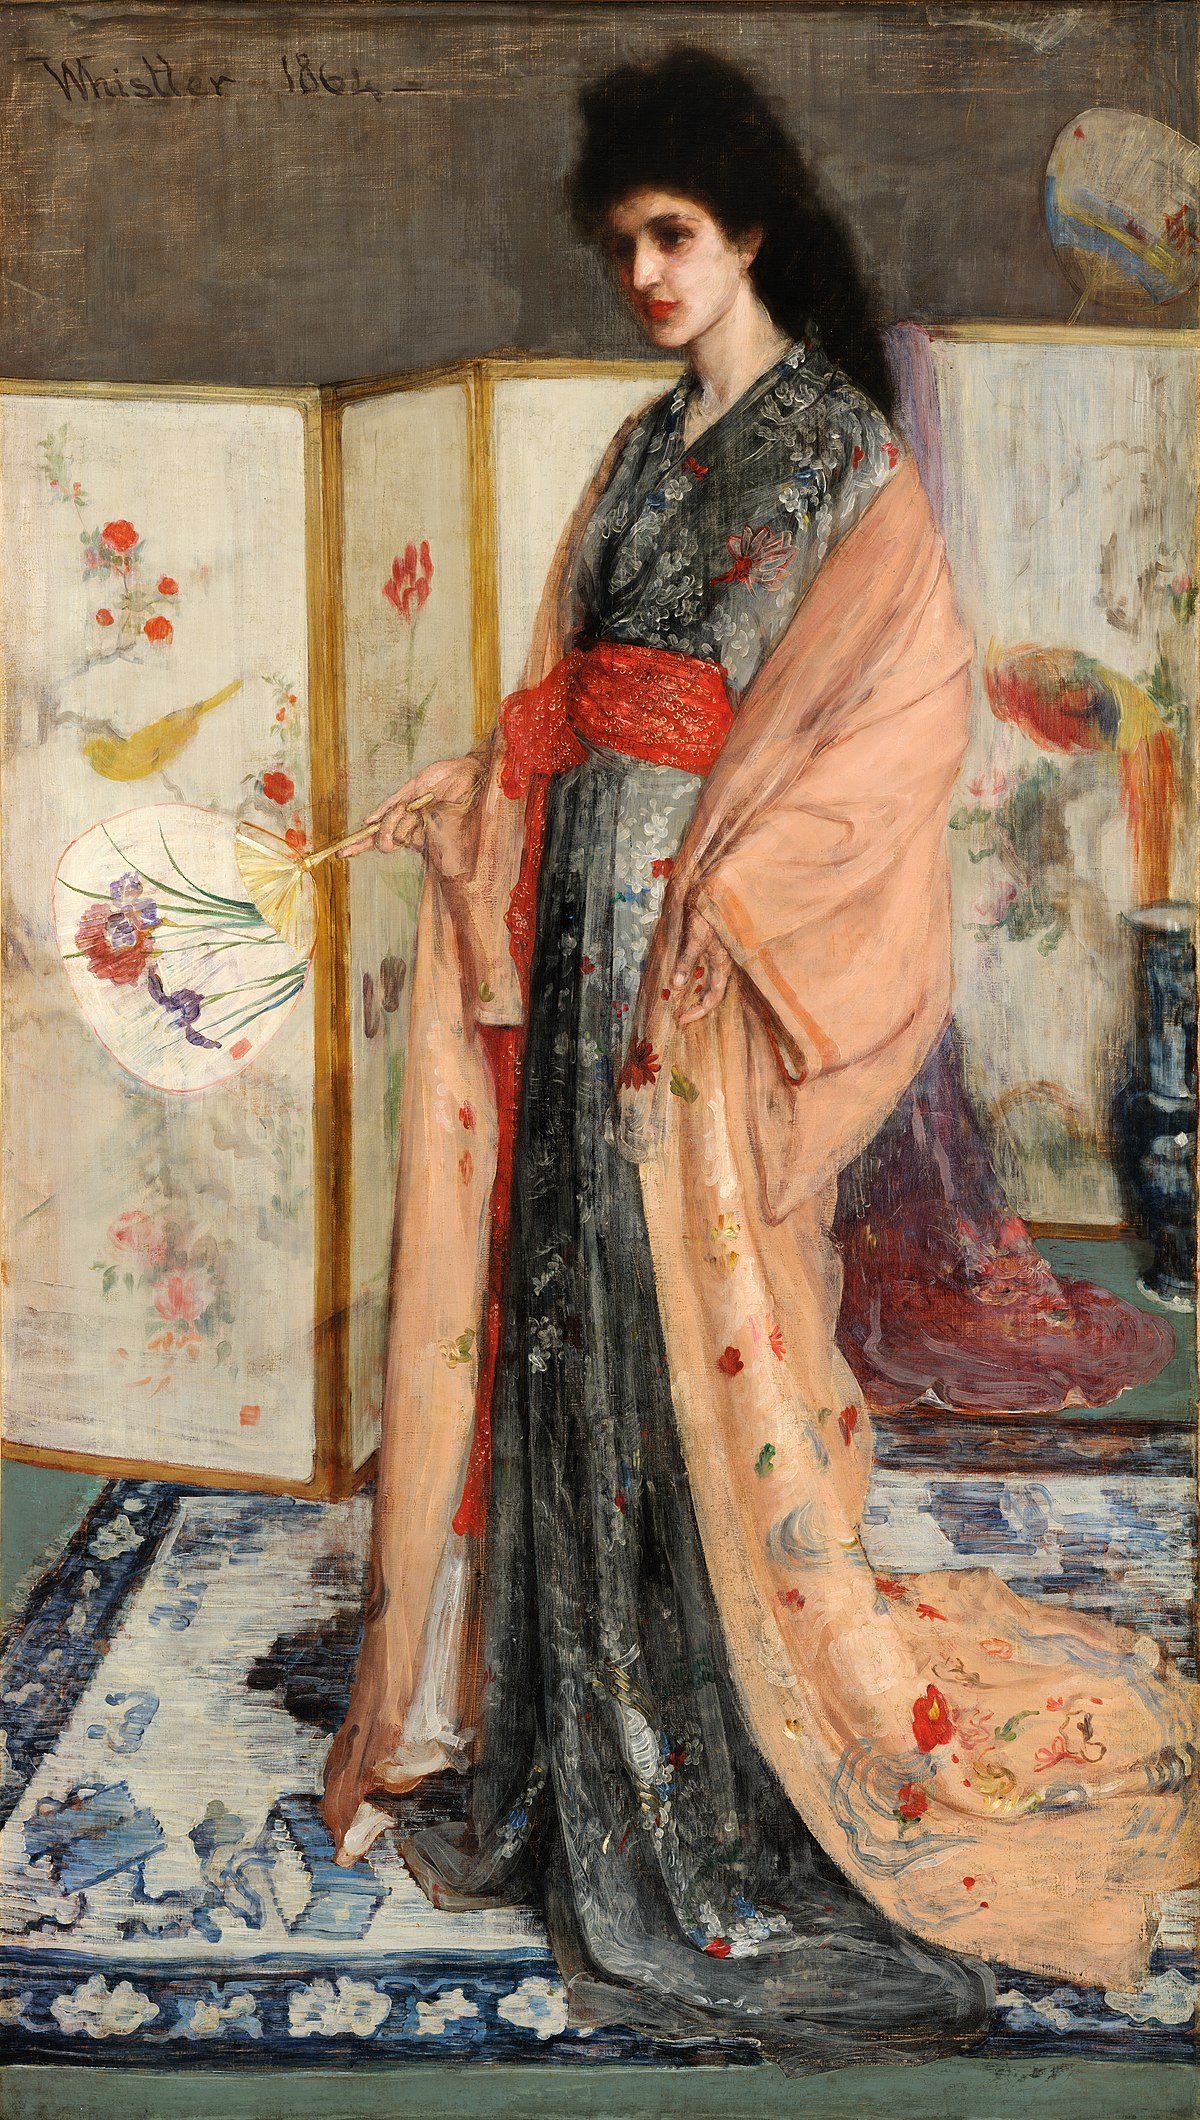 The Princess from the Land of Porcelain by James Abbott McNeill Whistler - 1865 - 201.5 × 116.1 cm National Museum of Asian Art